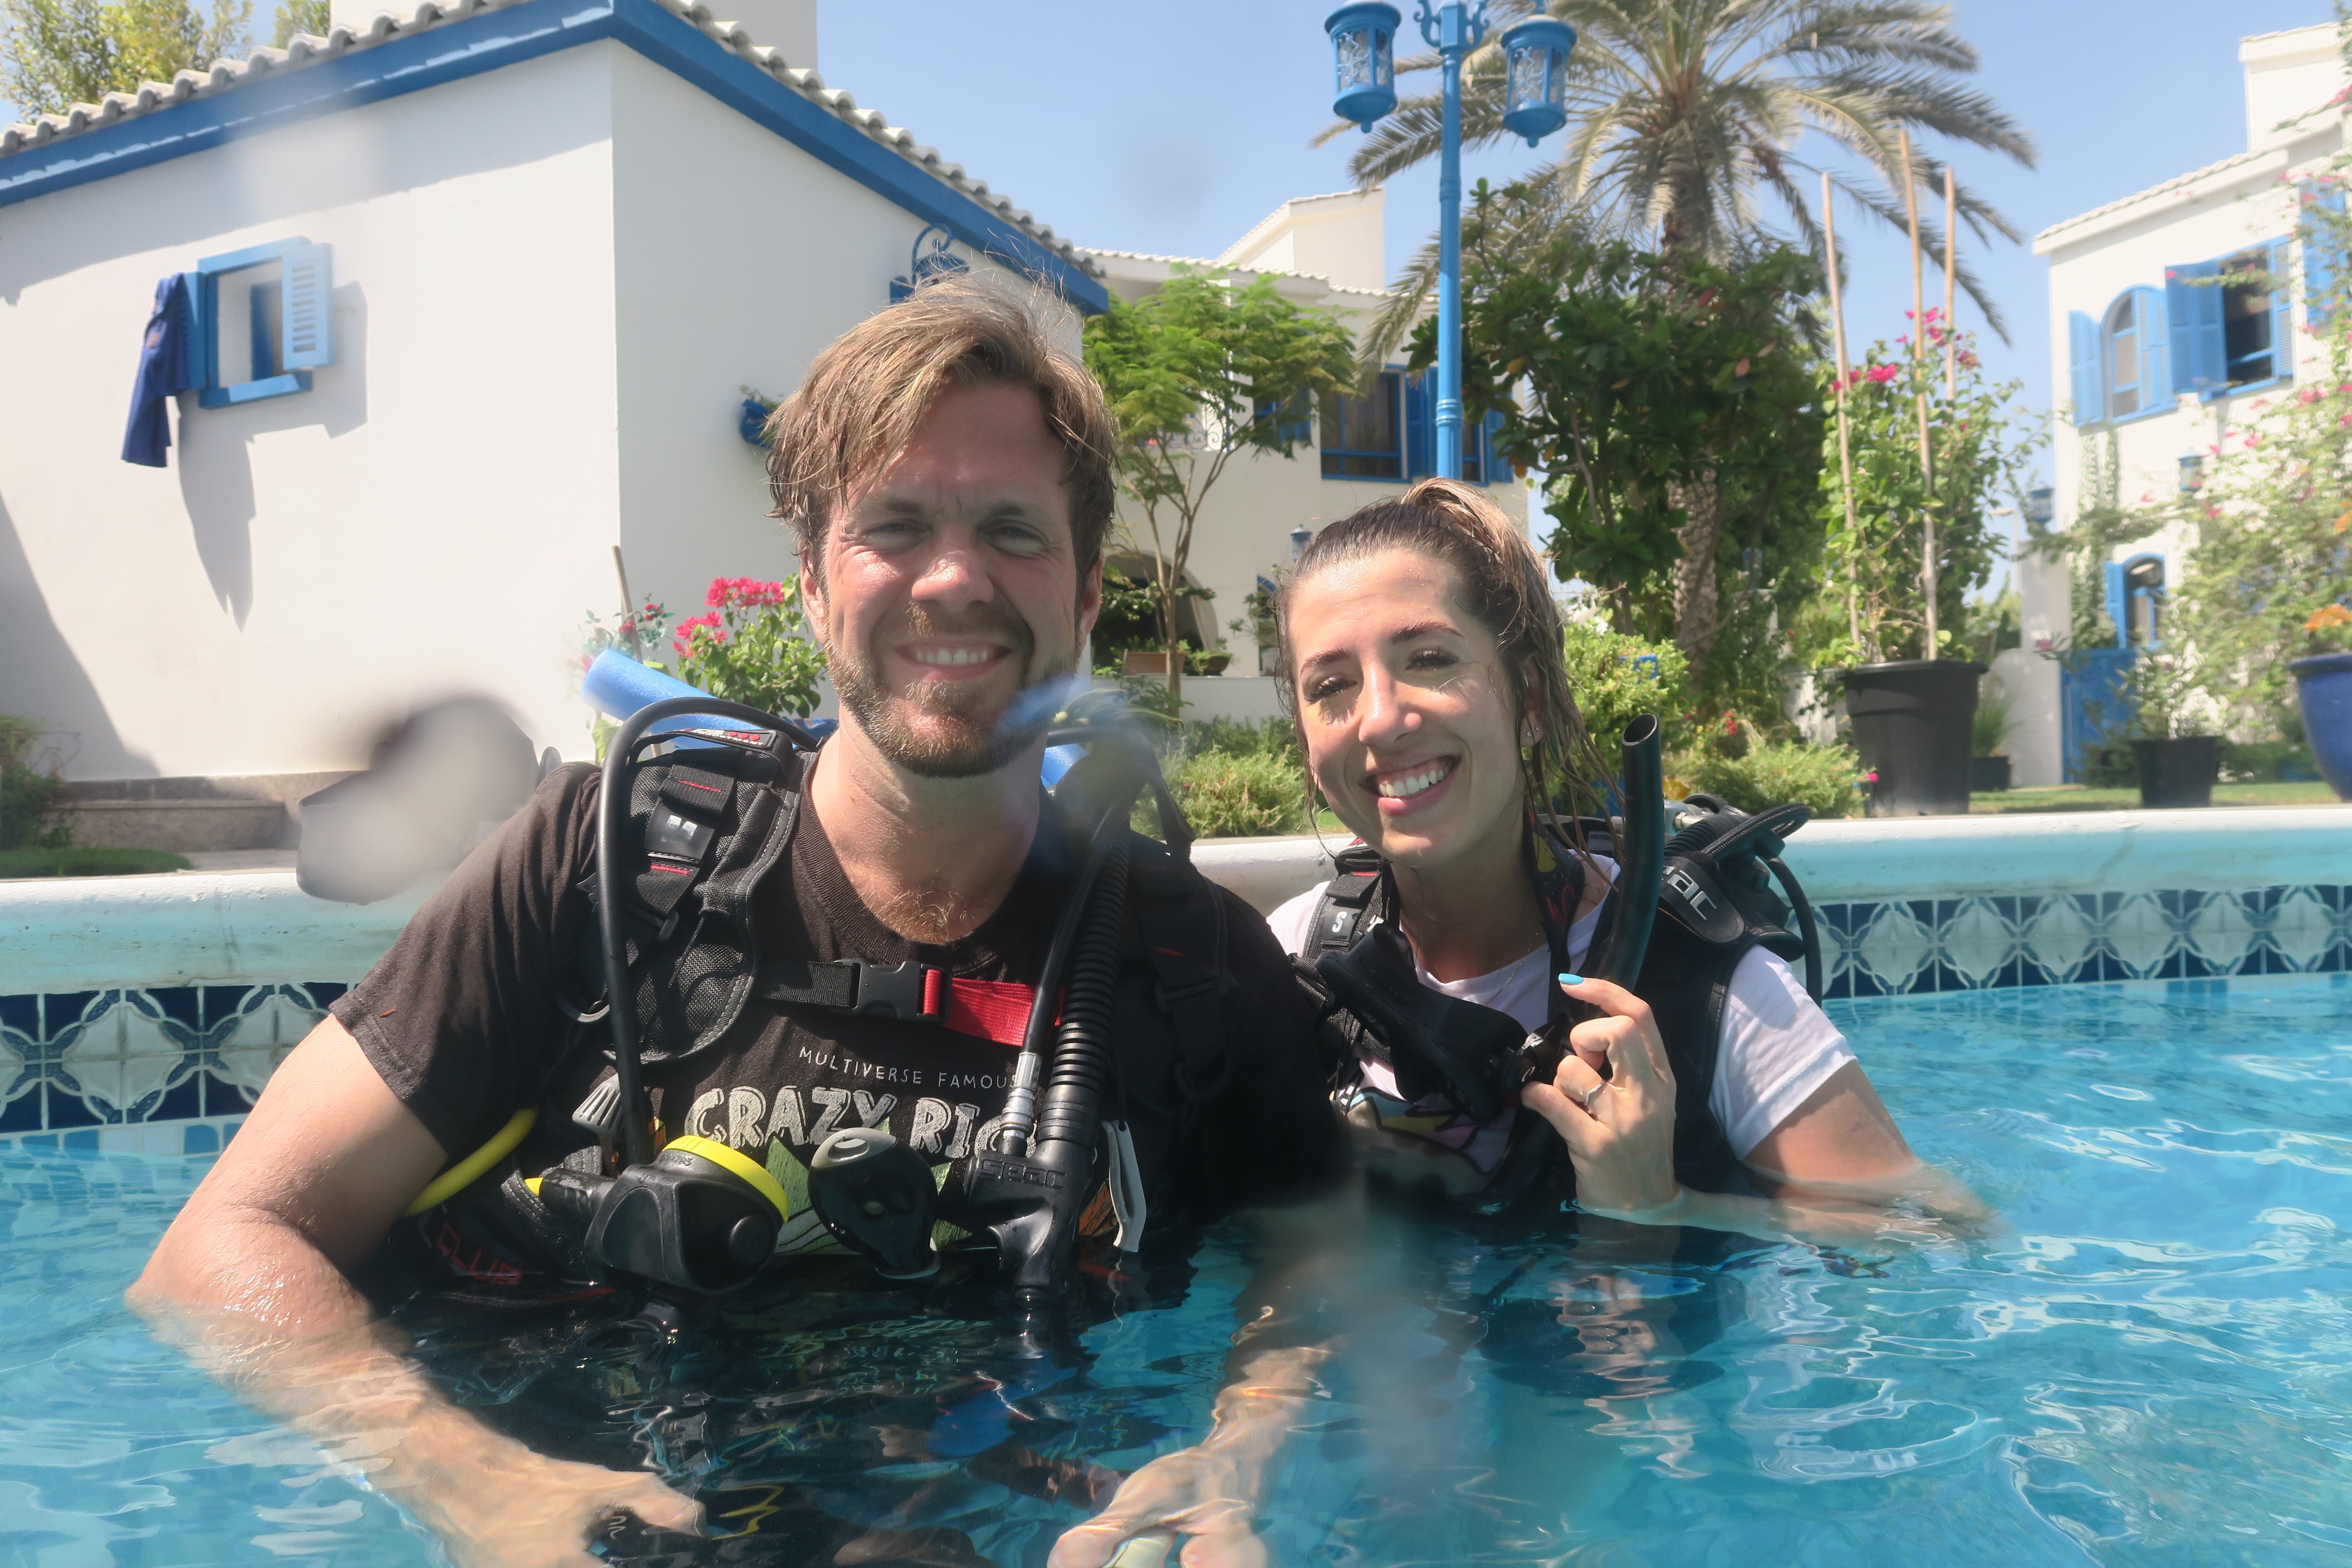 Amie and her partner scuba diving in a pool.